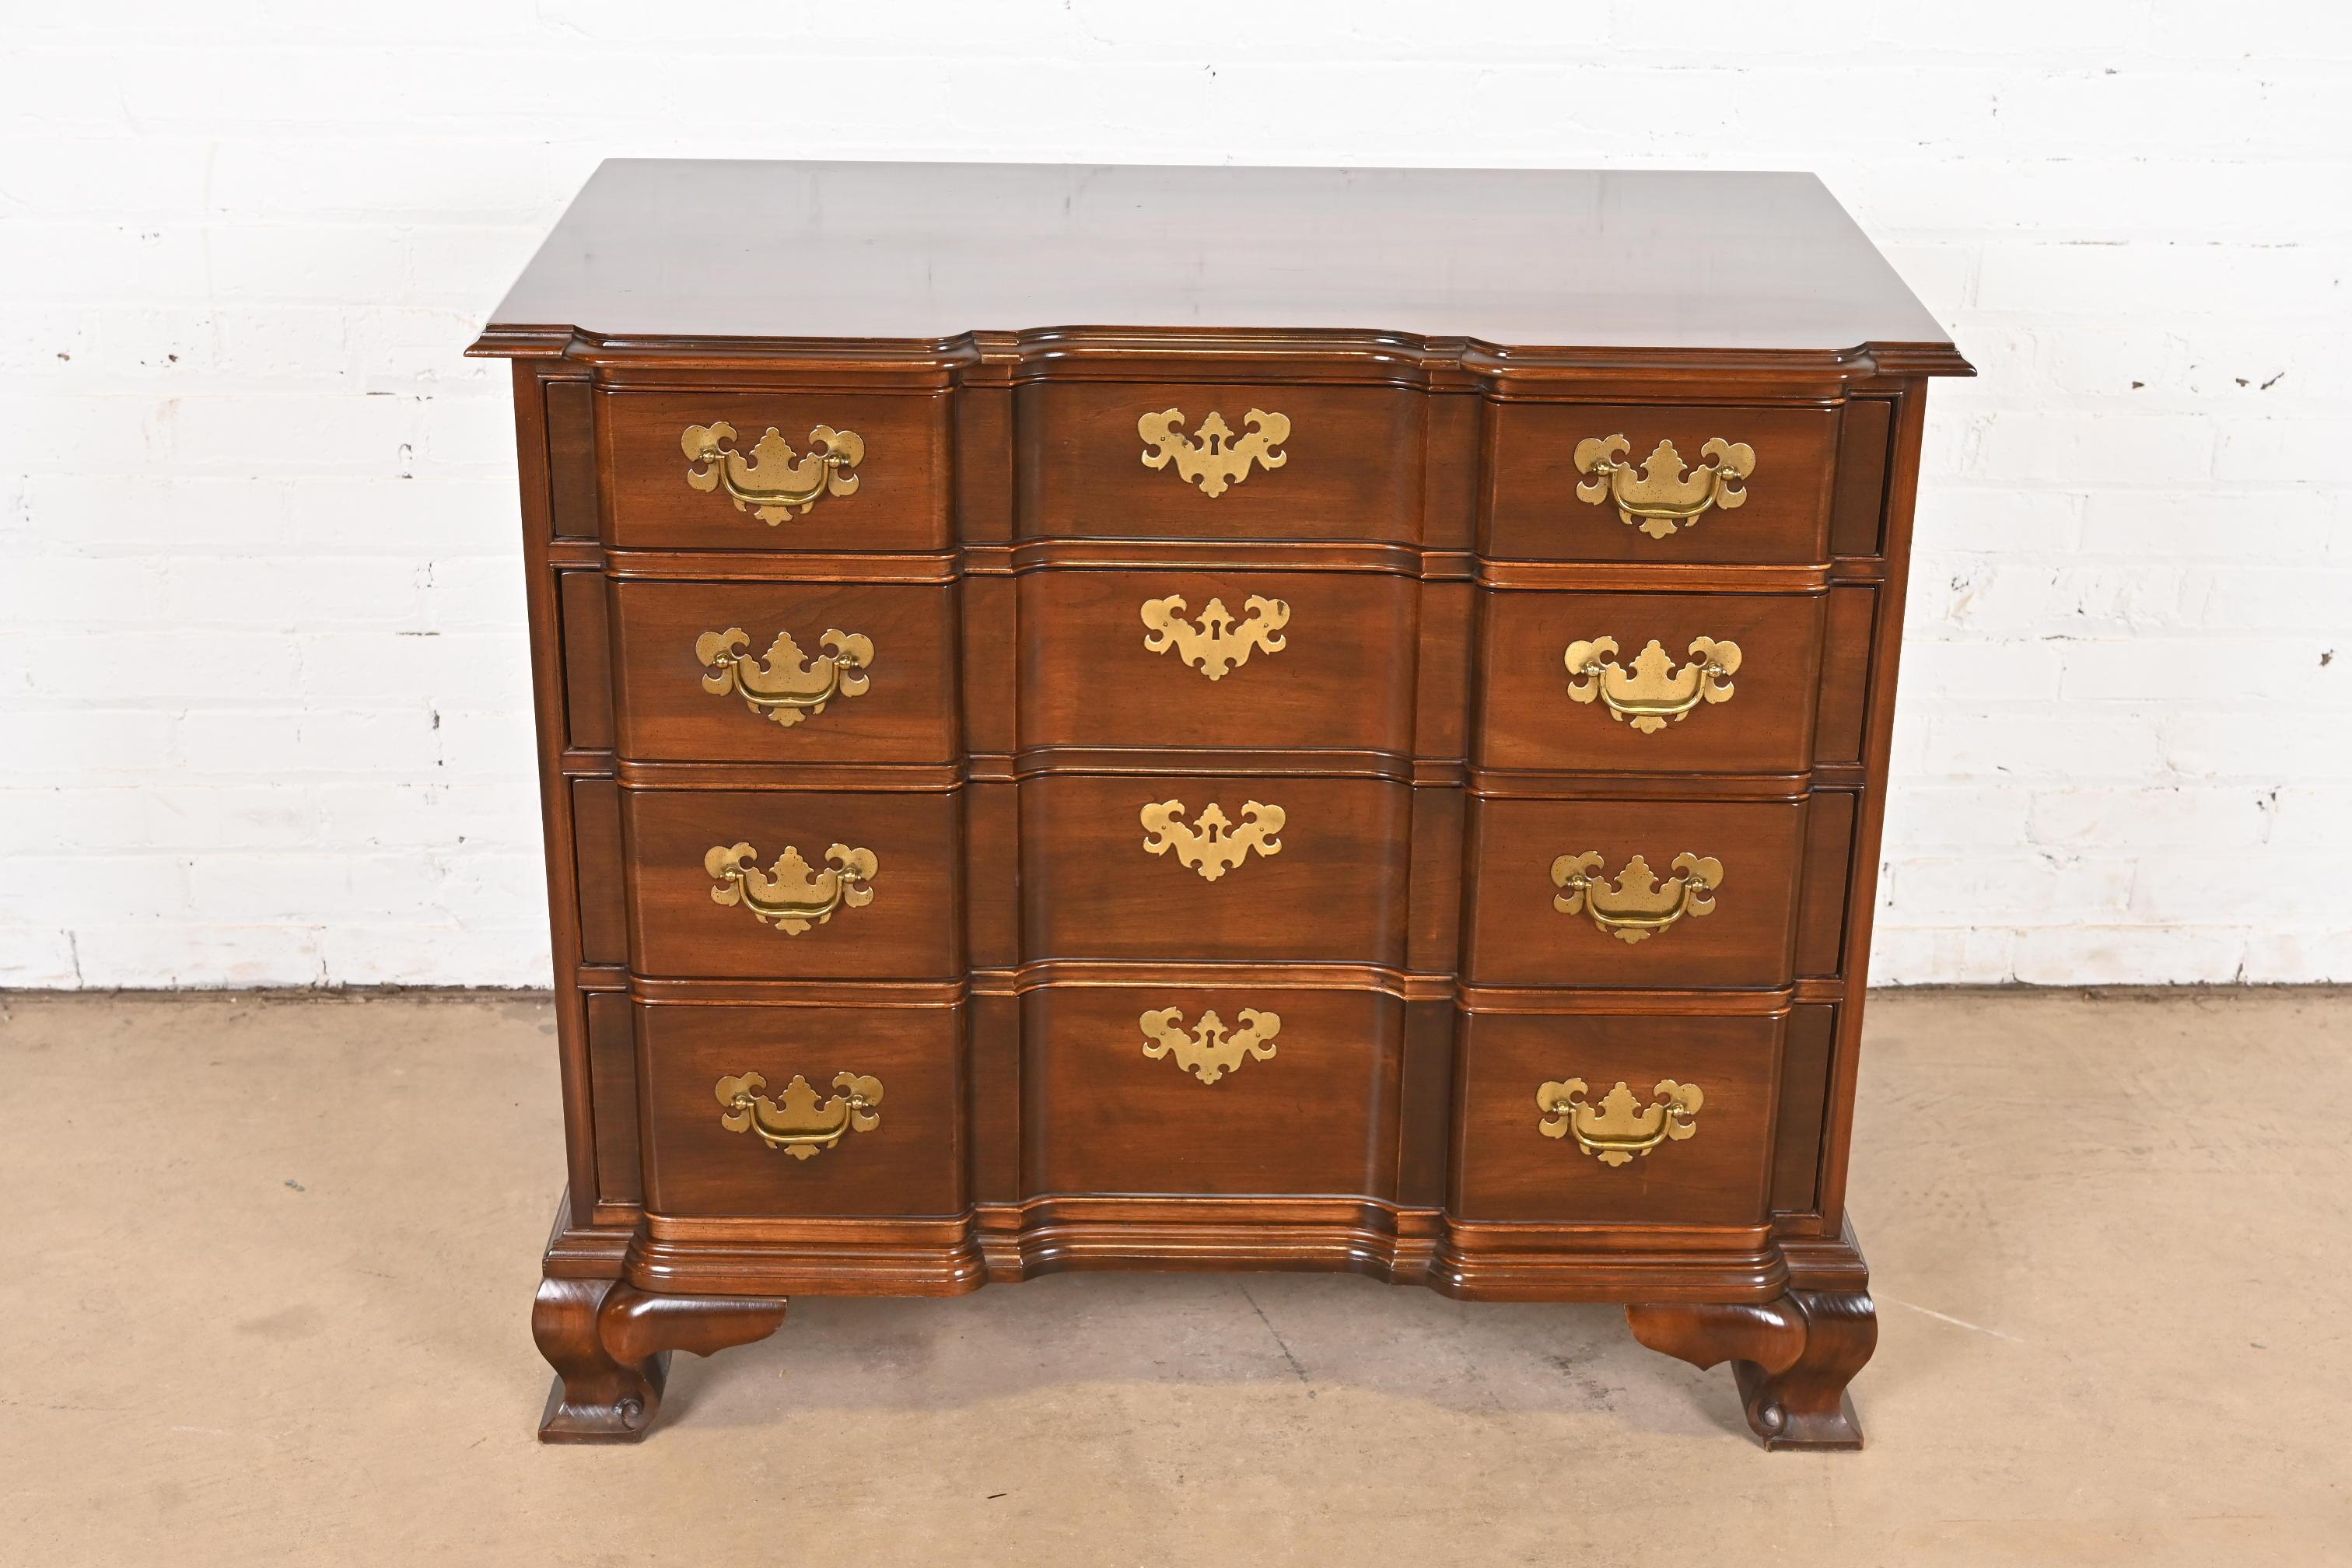 A gorgeous Georgian or Chippendale style four-drawer chest of drawers or commode

USA, Circa 1980s

Beautiful carved solid cherry wood, with original brass hardware.

Measures: 36